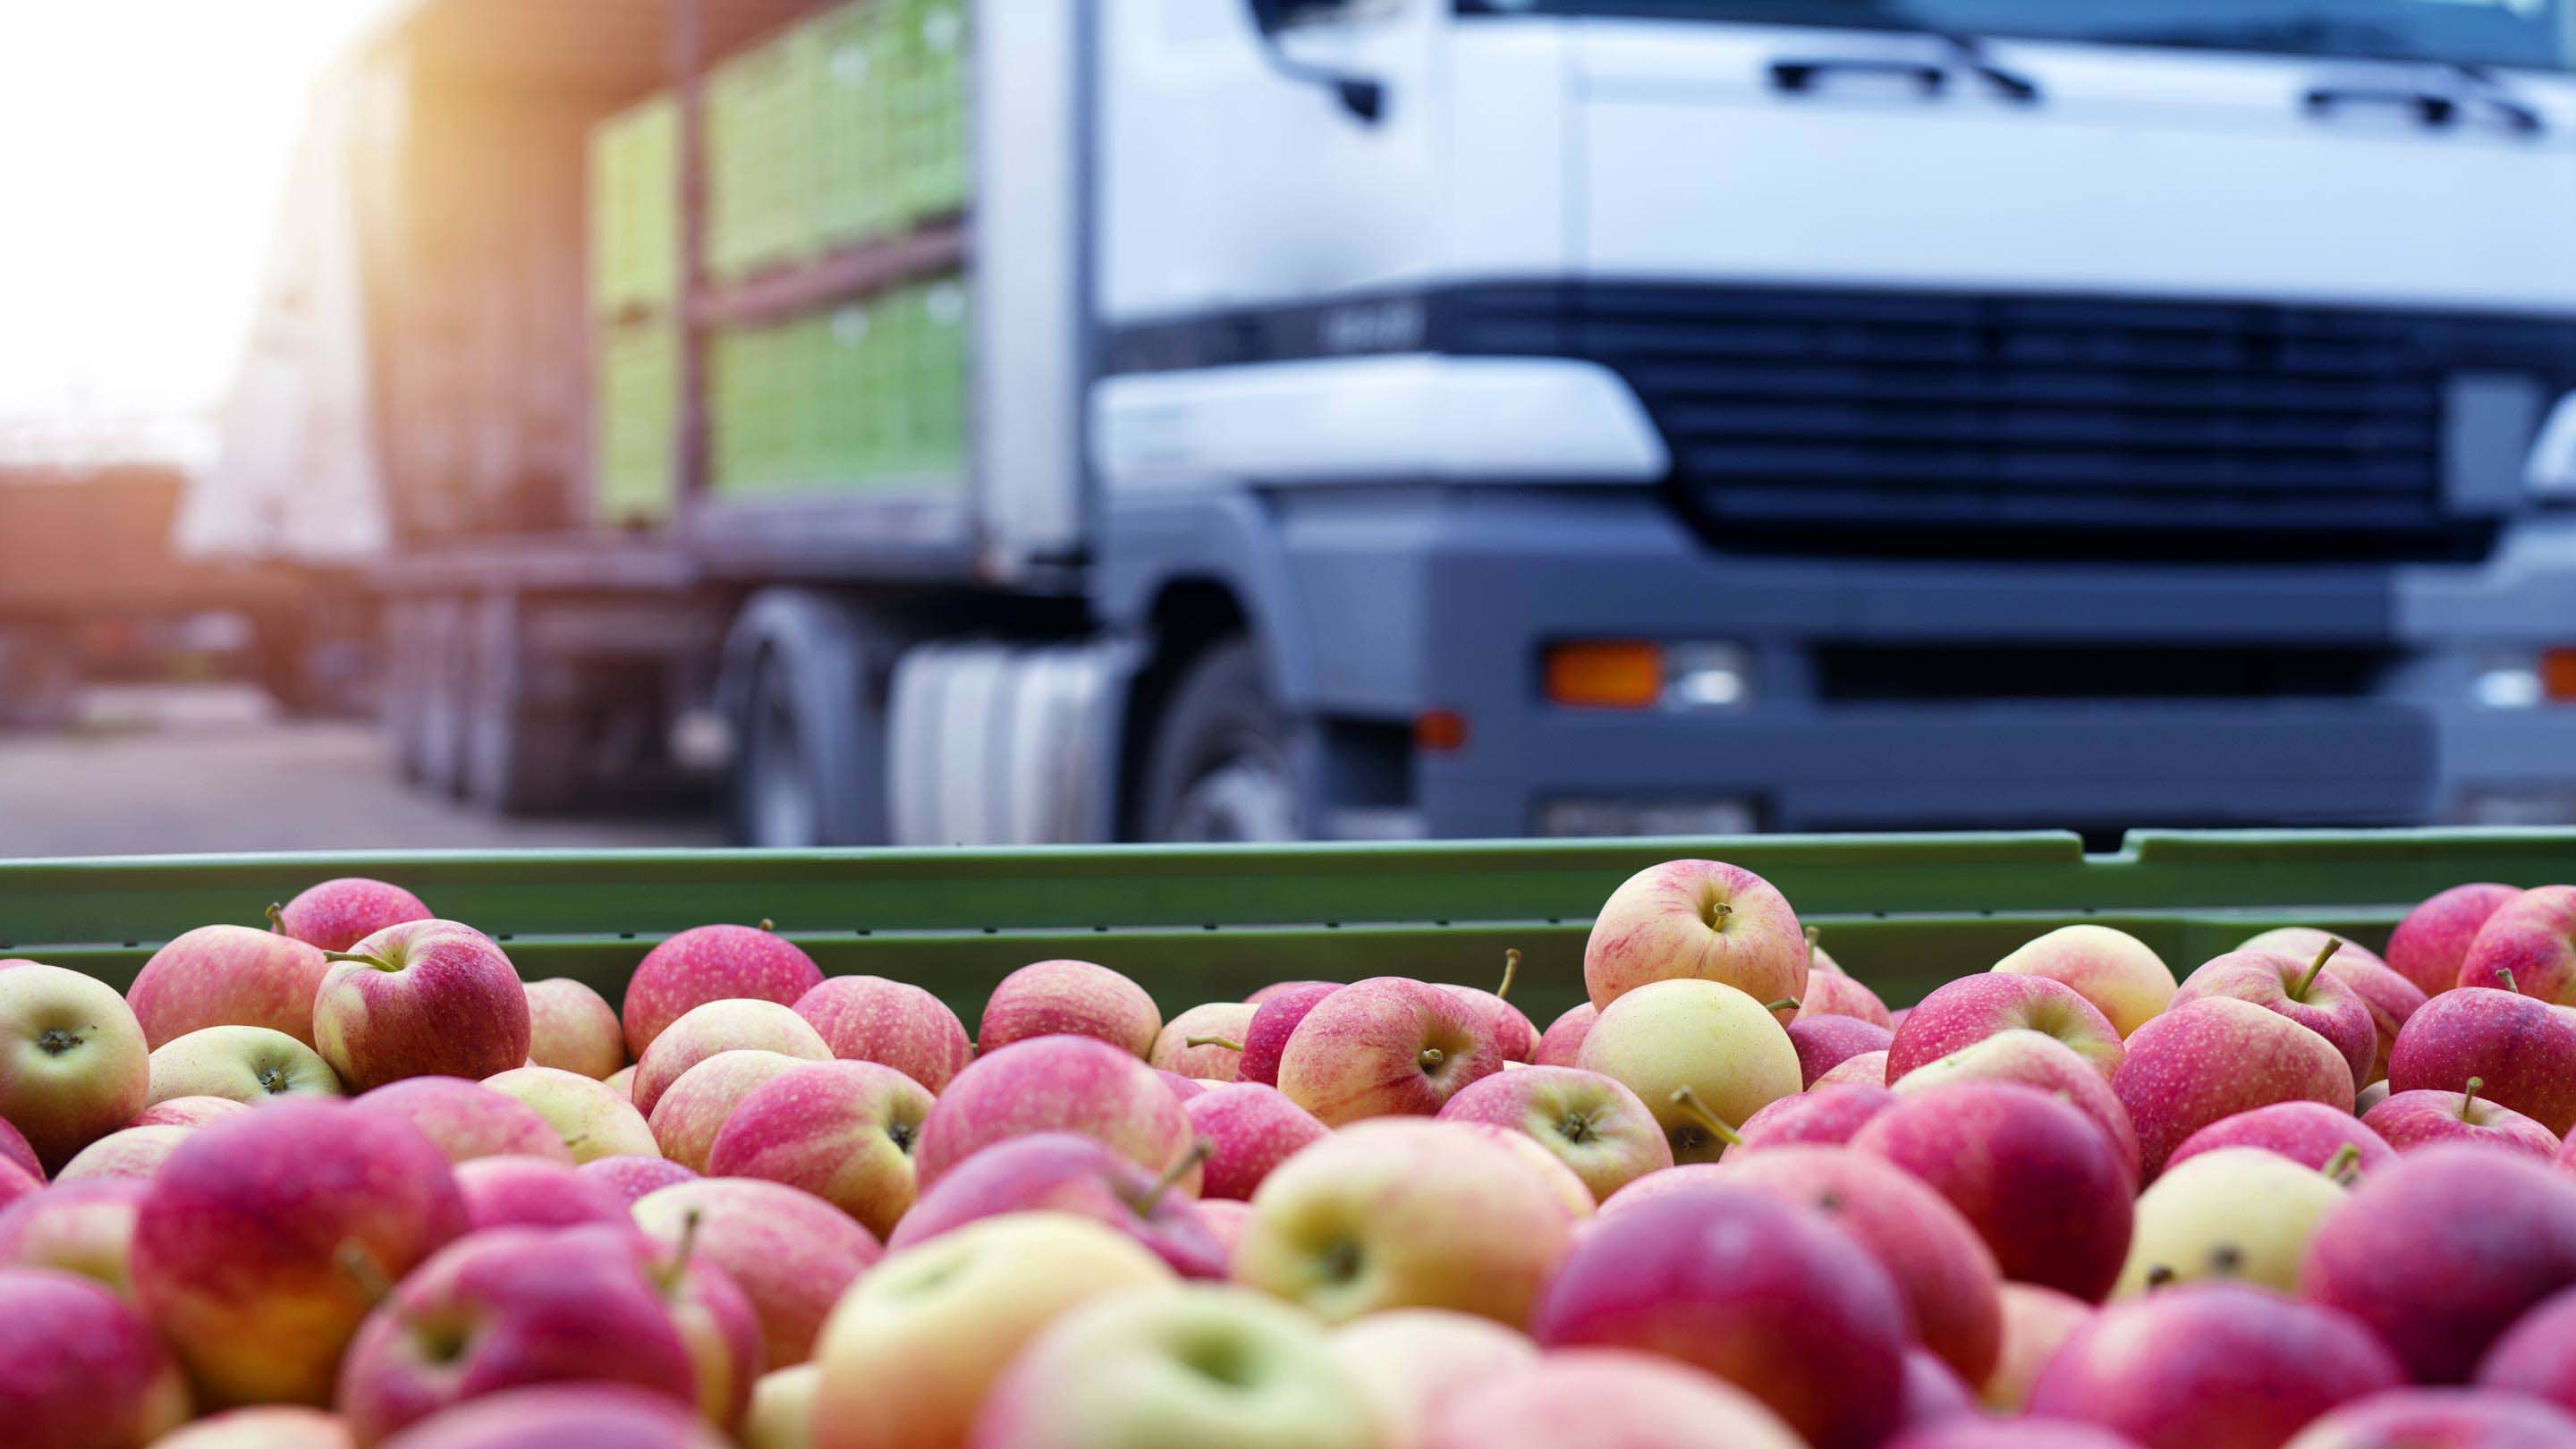 Apples being transported in truck